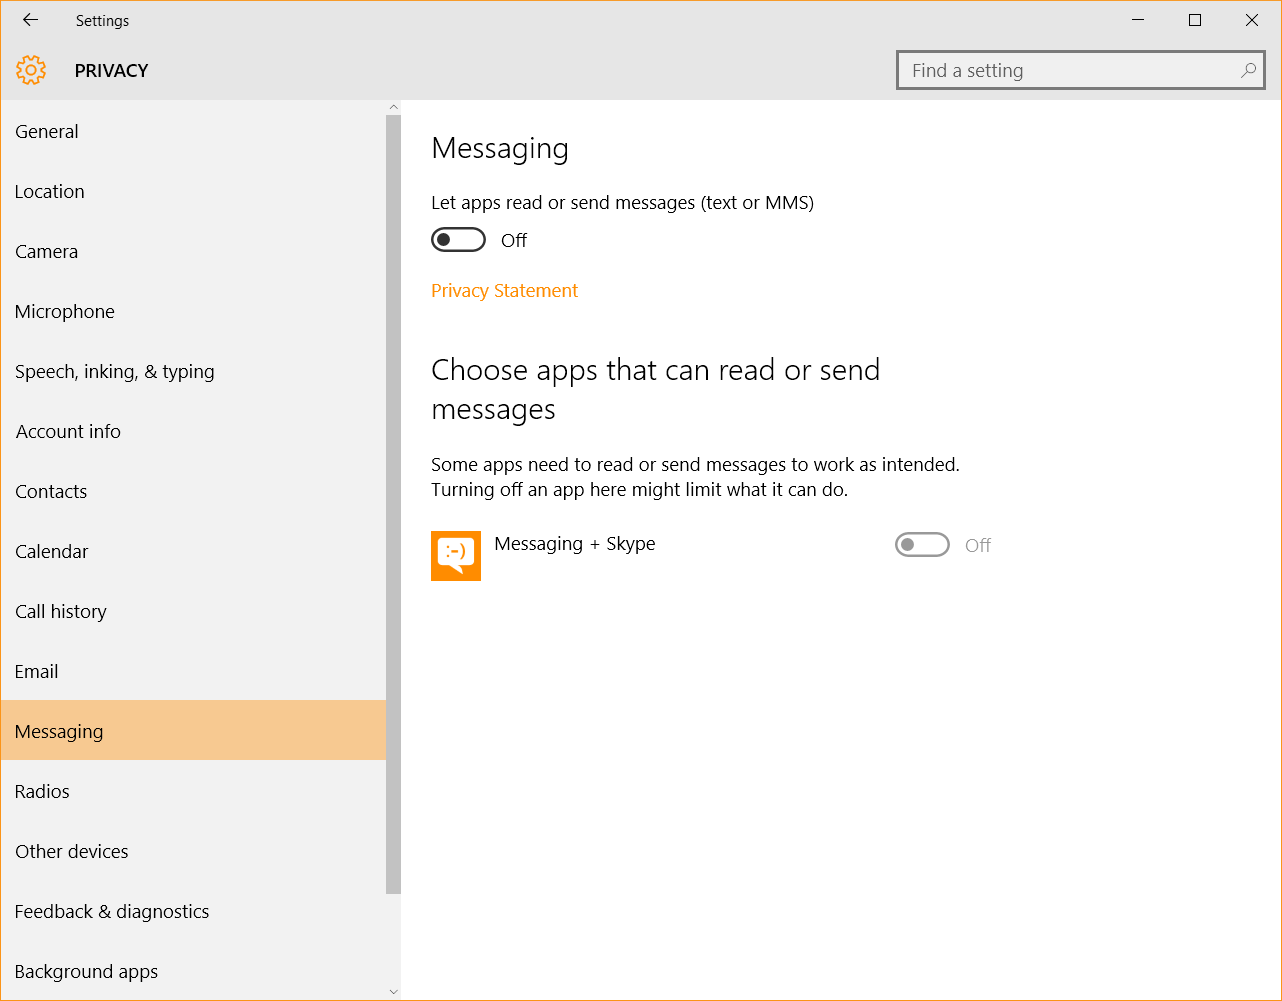 Windows 10 Security Guide - Messaging Privacy Settings